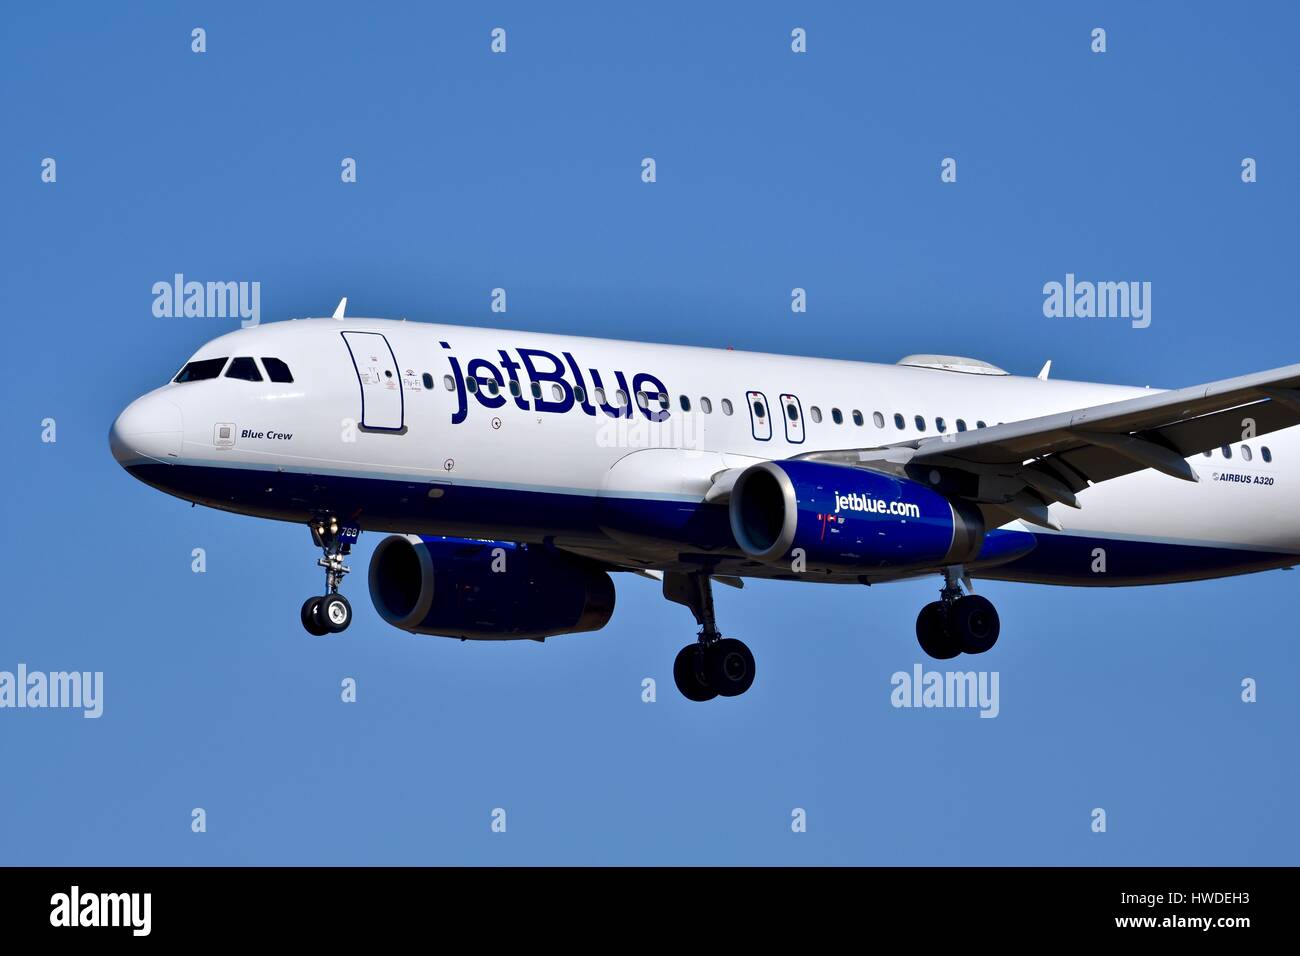 jetBlue Airlines plane in flight Stock Photo